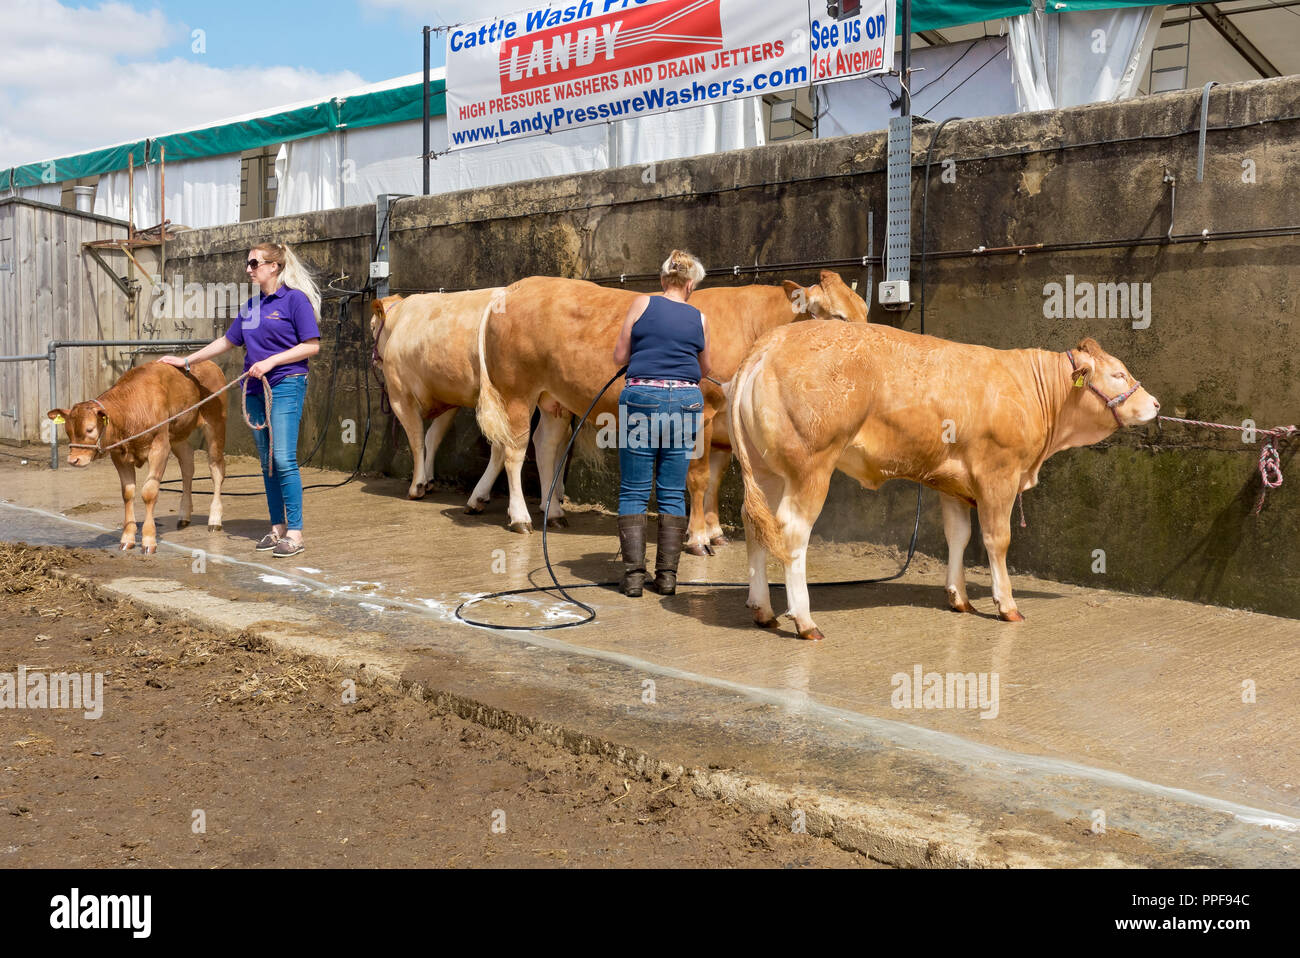 Farmer washing cattle cows livestock before judging Great Yorkshire Show in summer Harrogate North Yorkshire England UK United Kingdom Great Britain Stock Photo